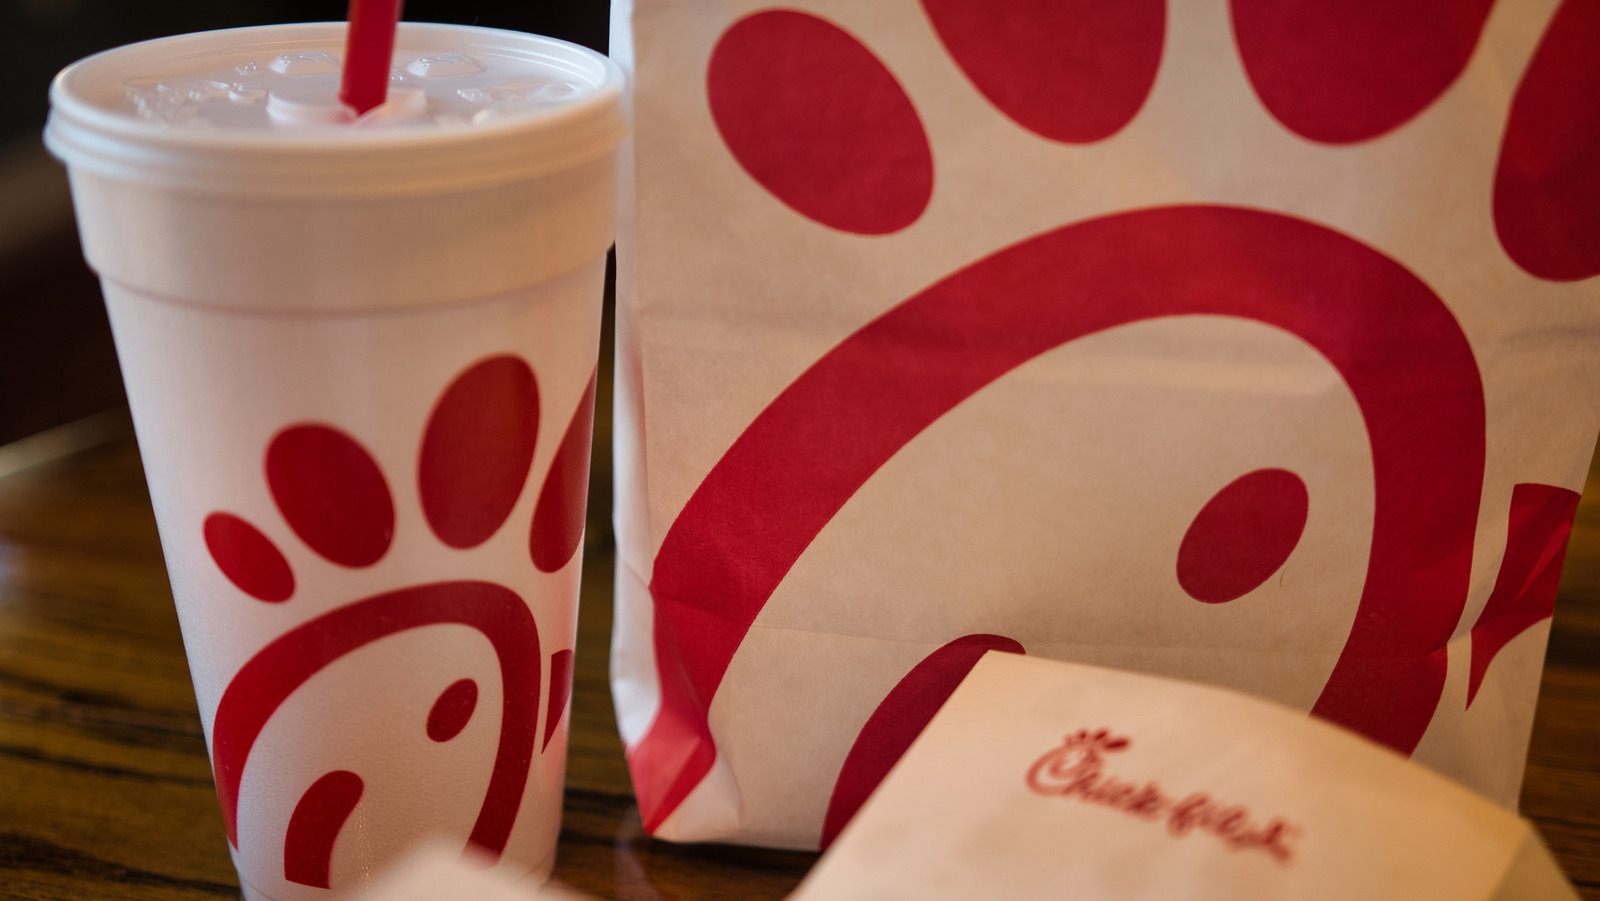 What You Didn't Know About ChickFilA's DaddyDaughter Night